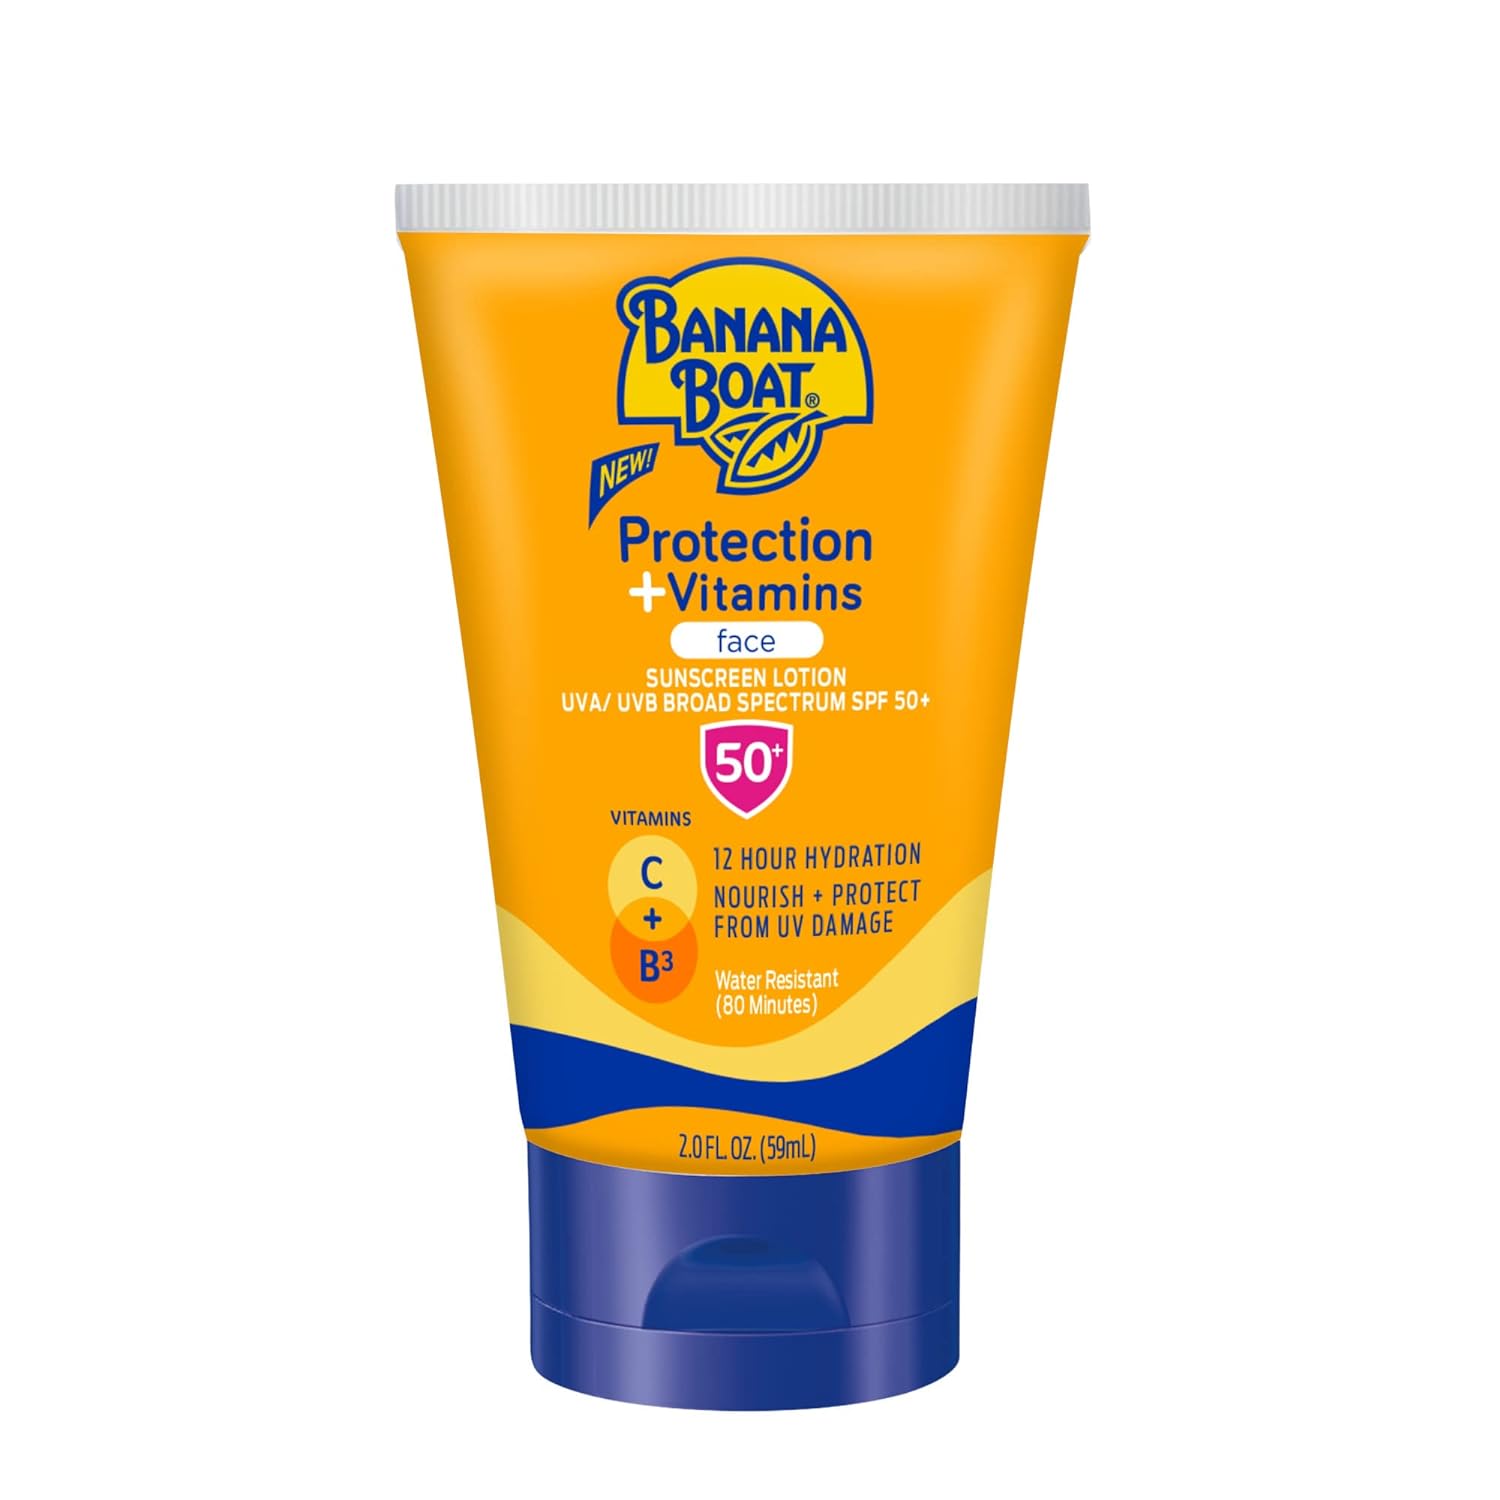 Banana Boat Protection + Vitamins Sunscreen for Face SPF 50 | Travel Size Sunscreen with Vitamin C & Niacinamide for Face | Banana Boat Fragrance-Free Face Sunscreen with Niacinamide, 2 oz